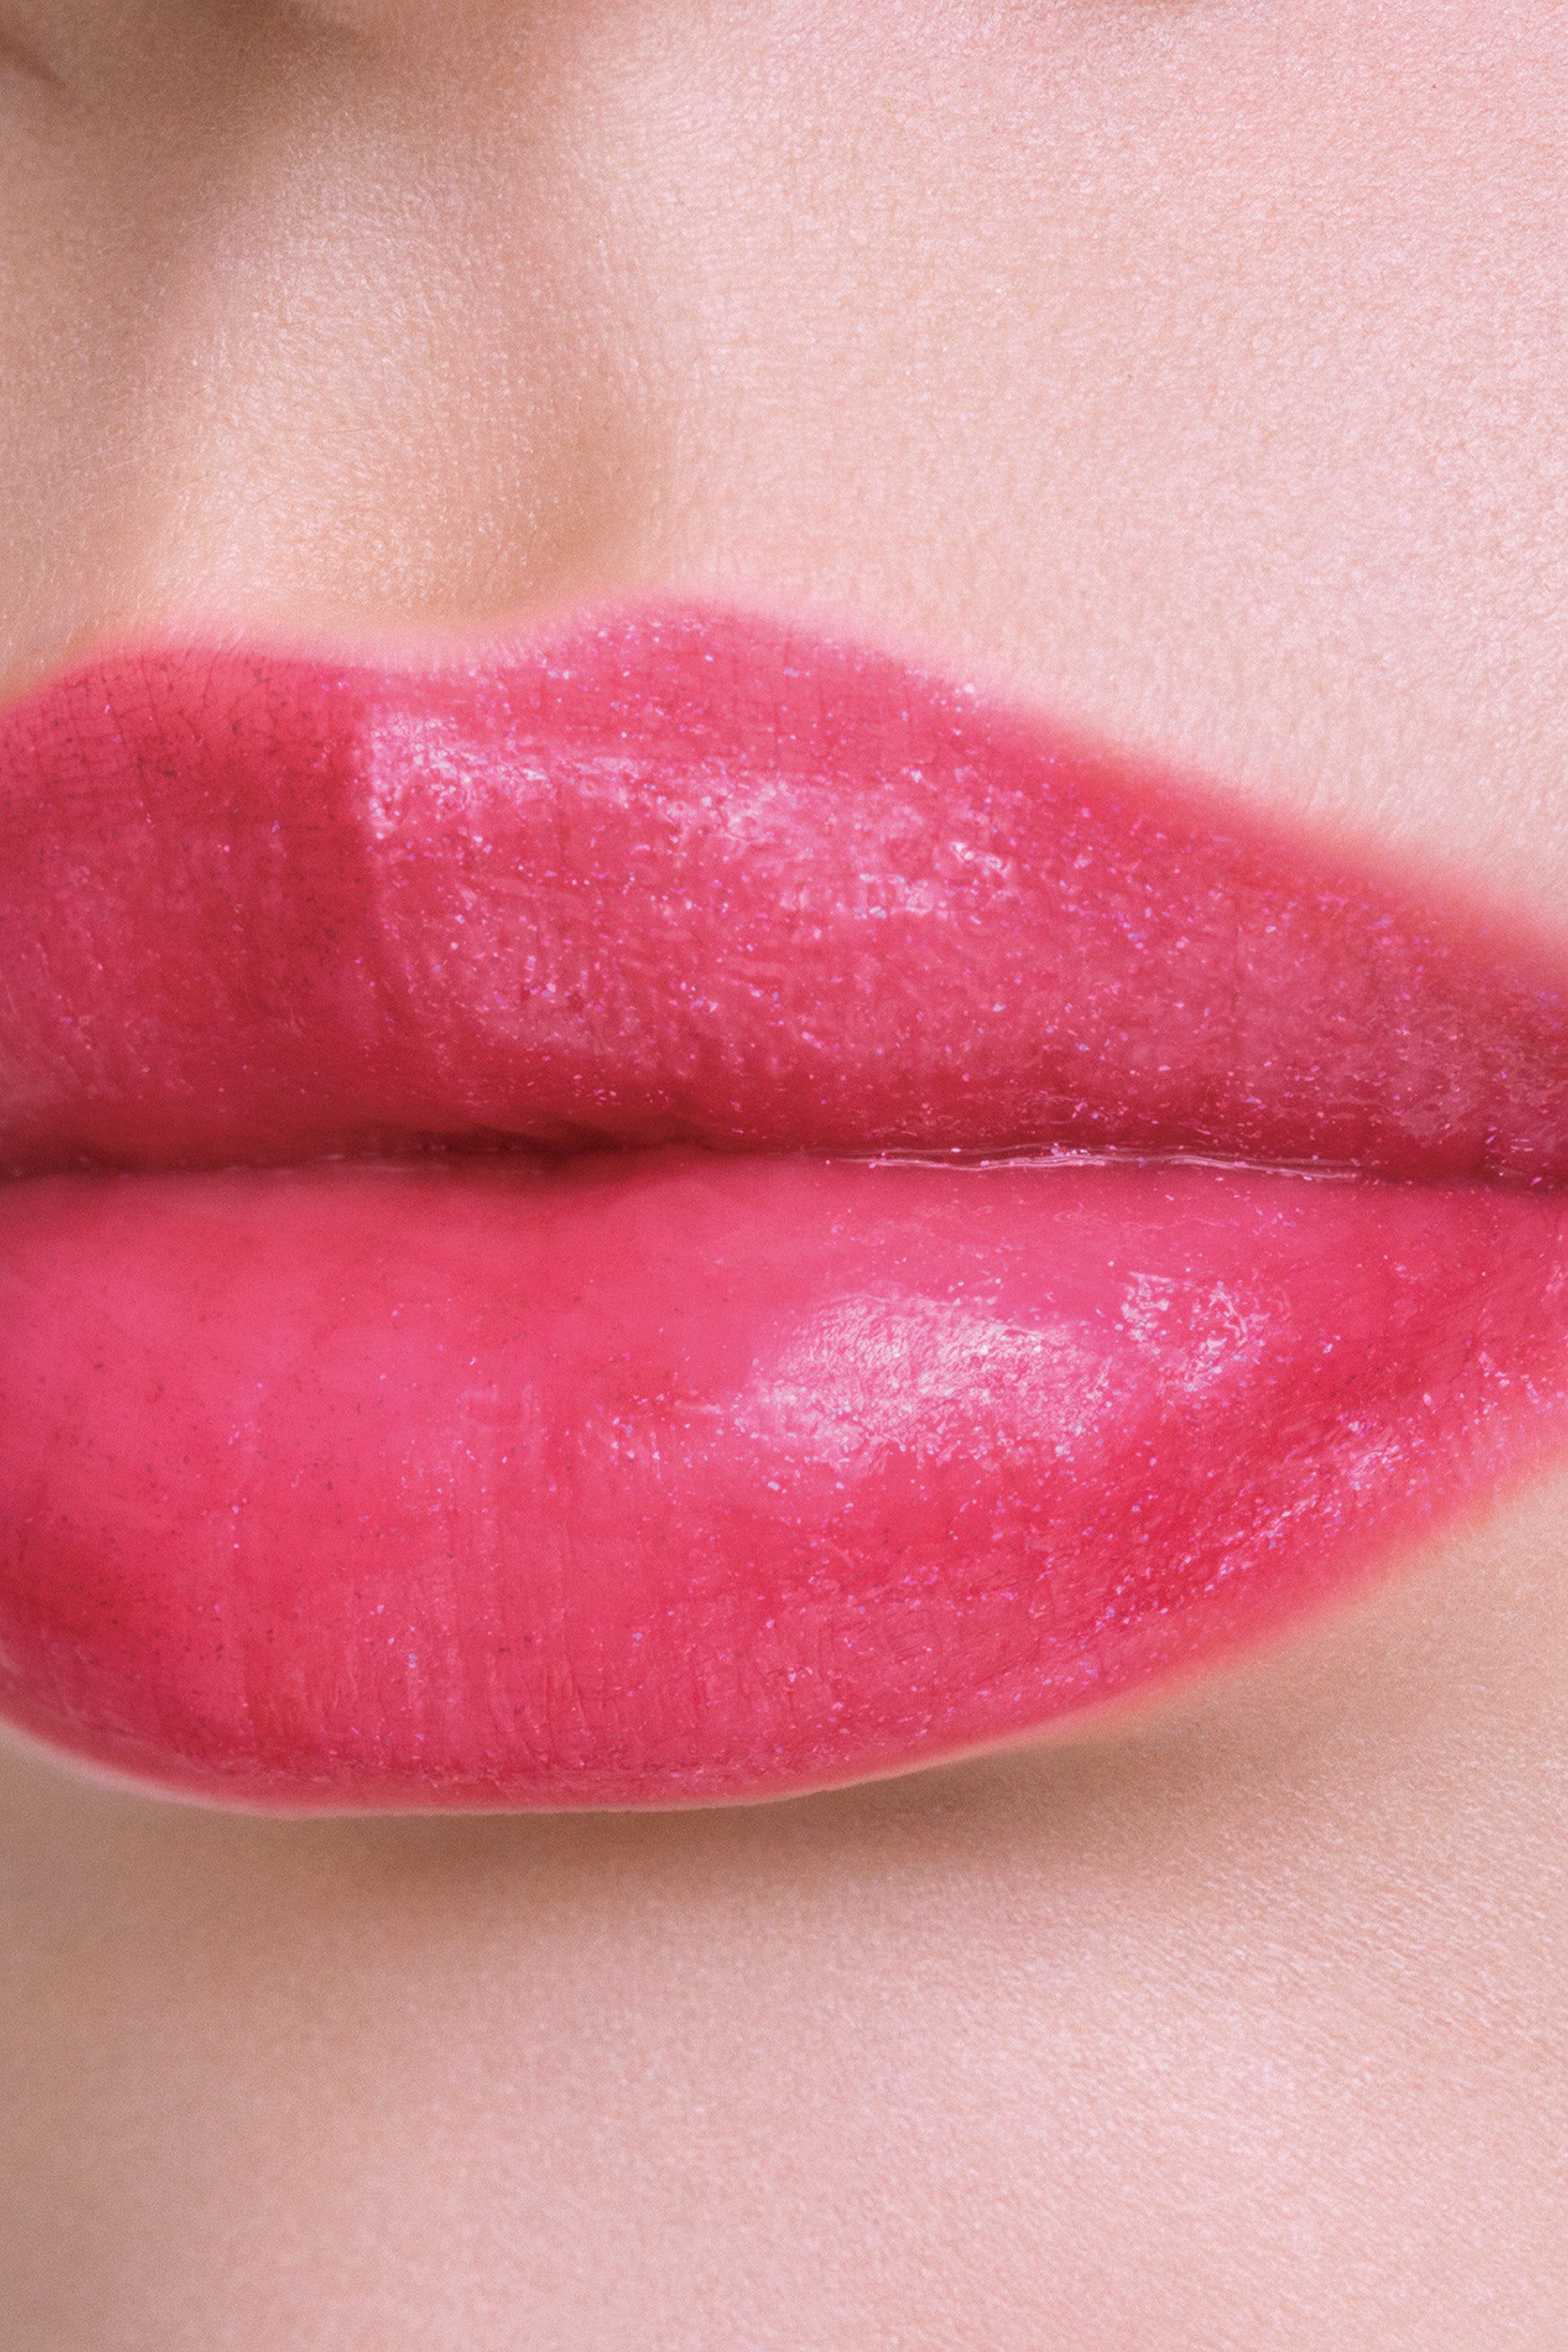 This lip with Cherry – emollient gives your lips a natural and dewy tone